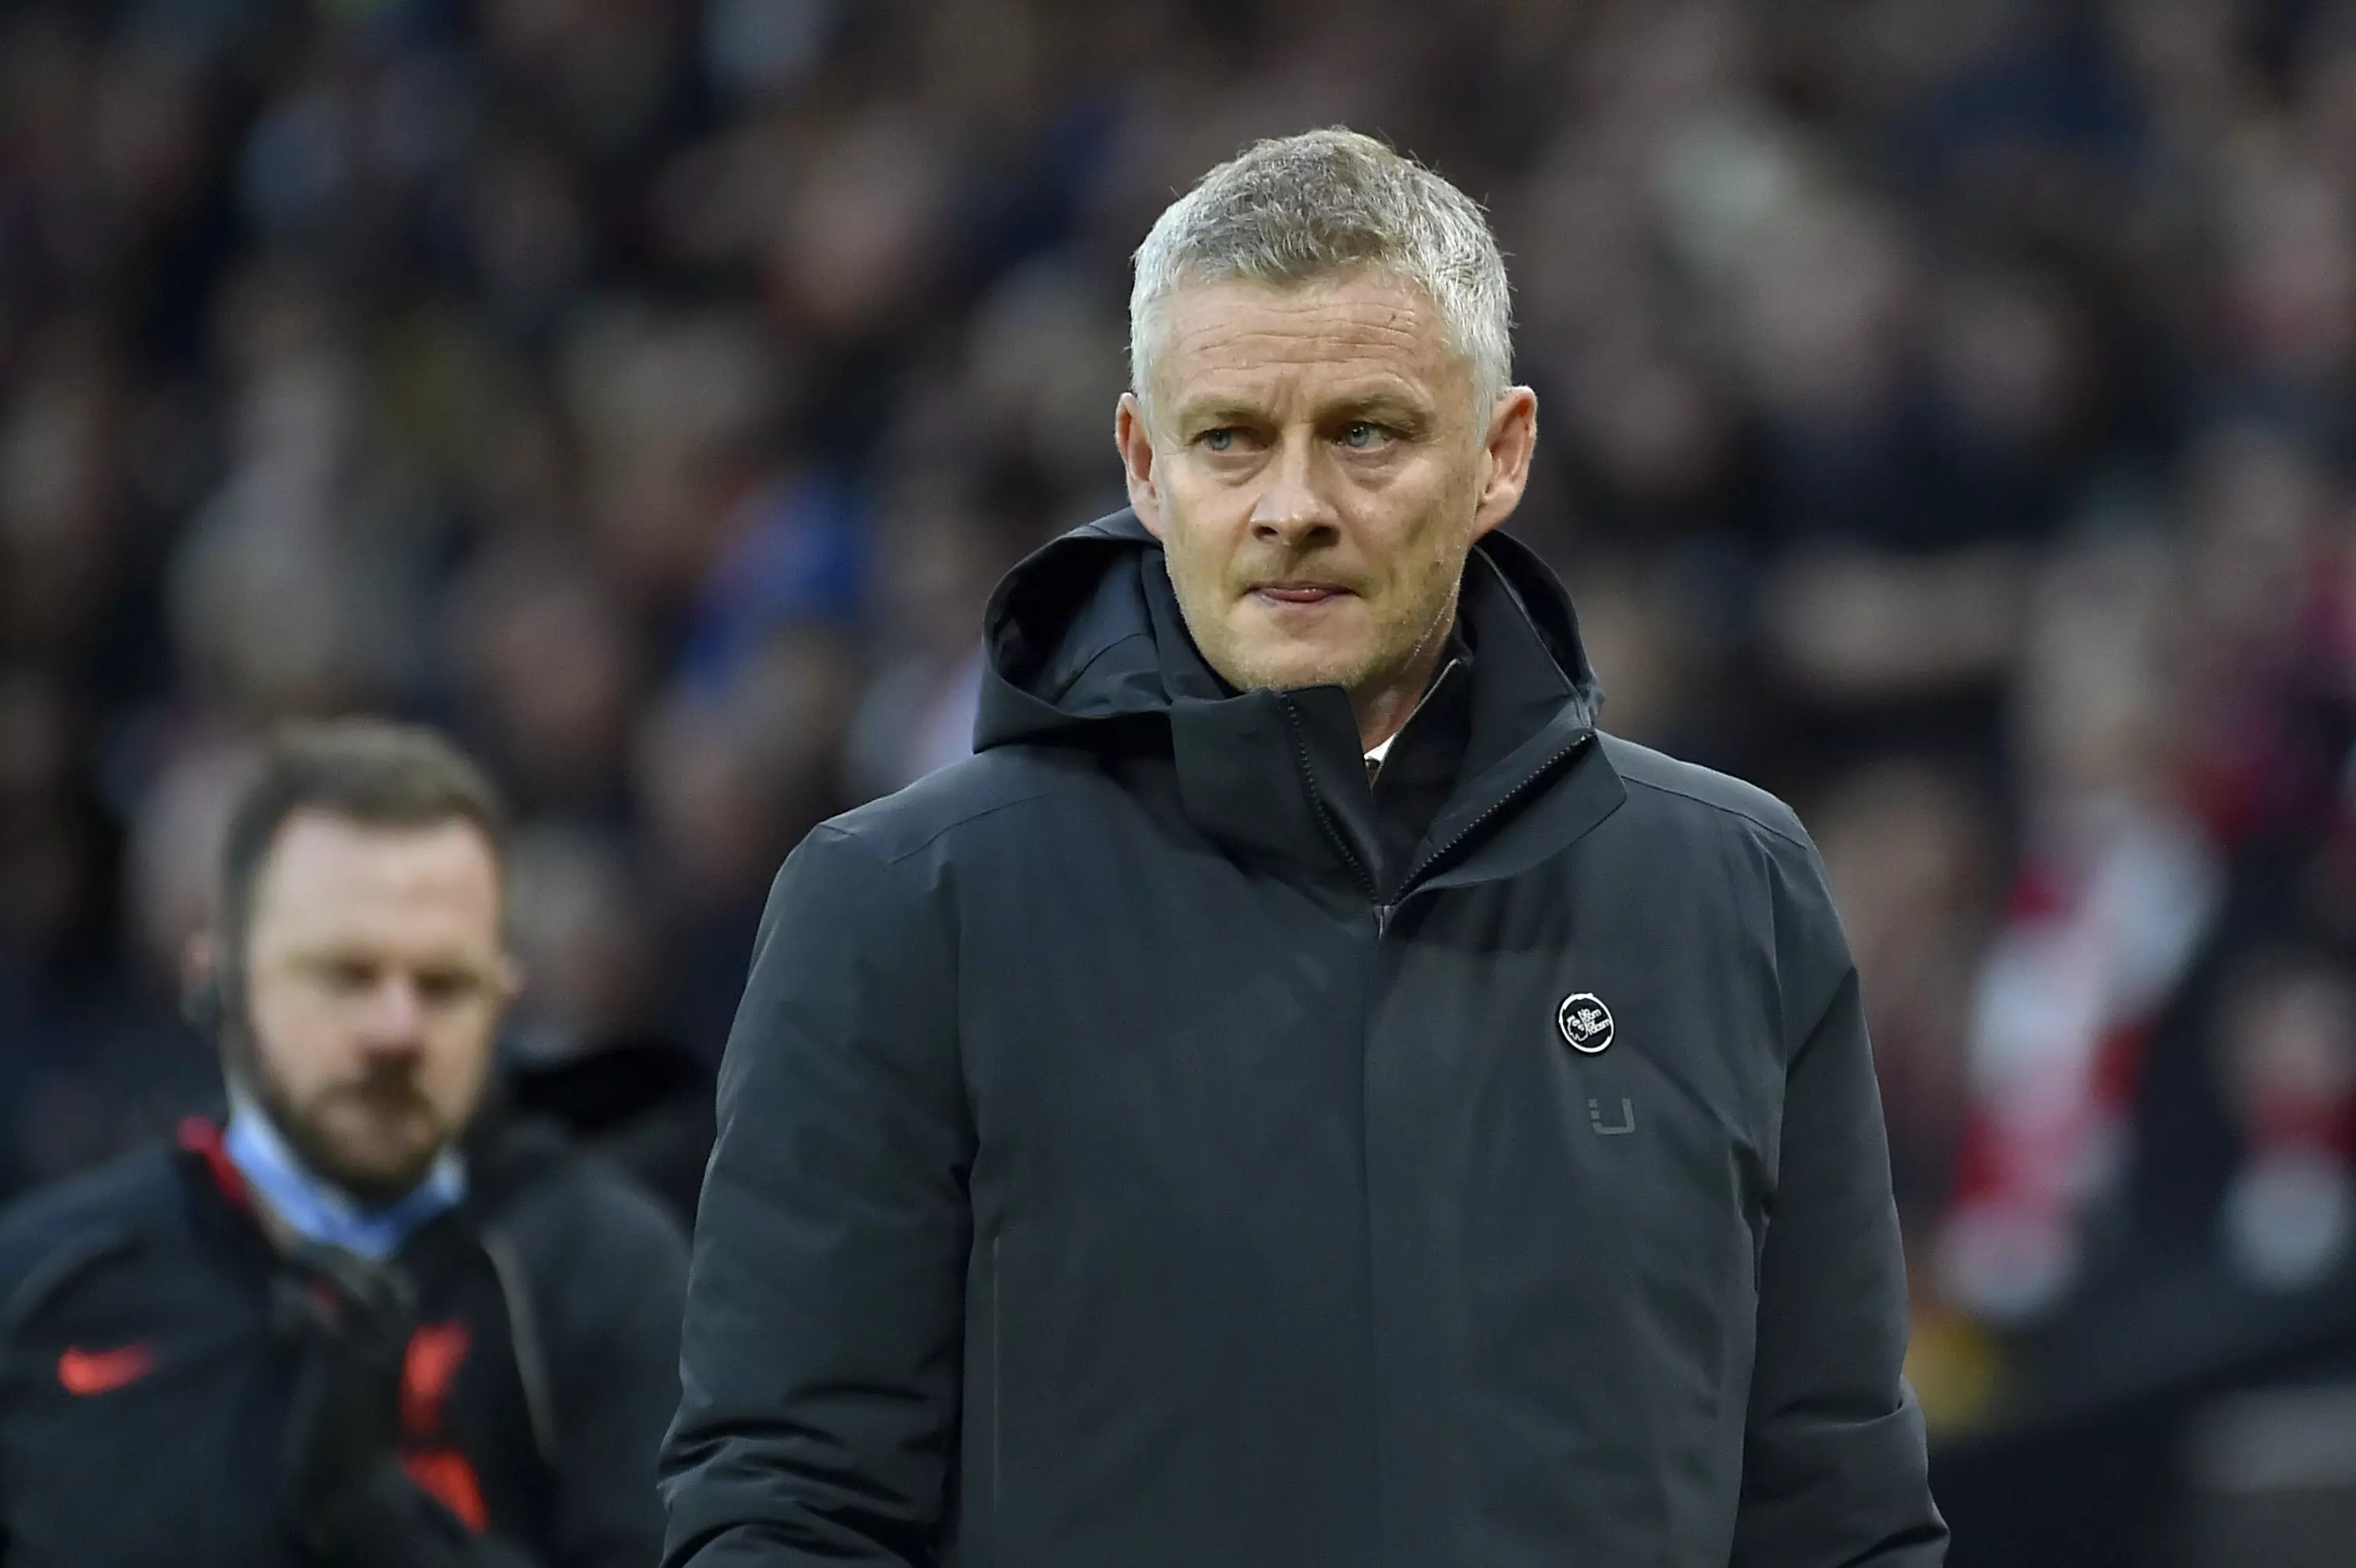 PA: Ole Gunnar Solskjaer has reportedly been given three games to save his job.